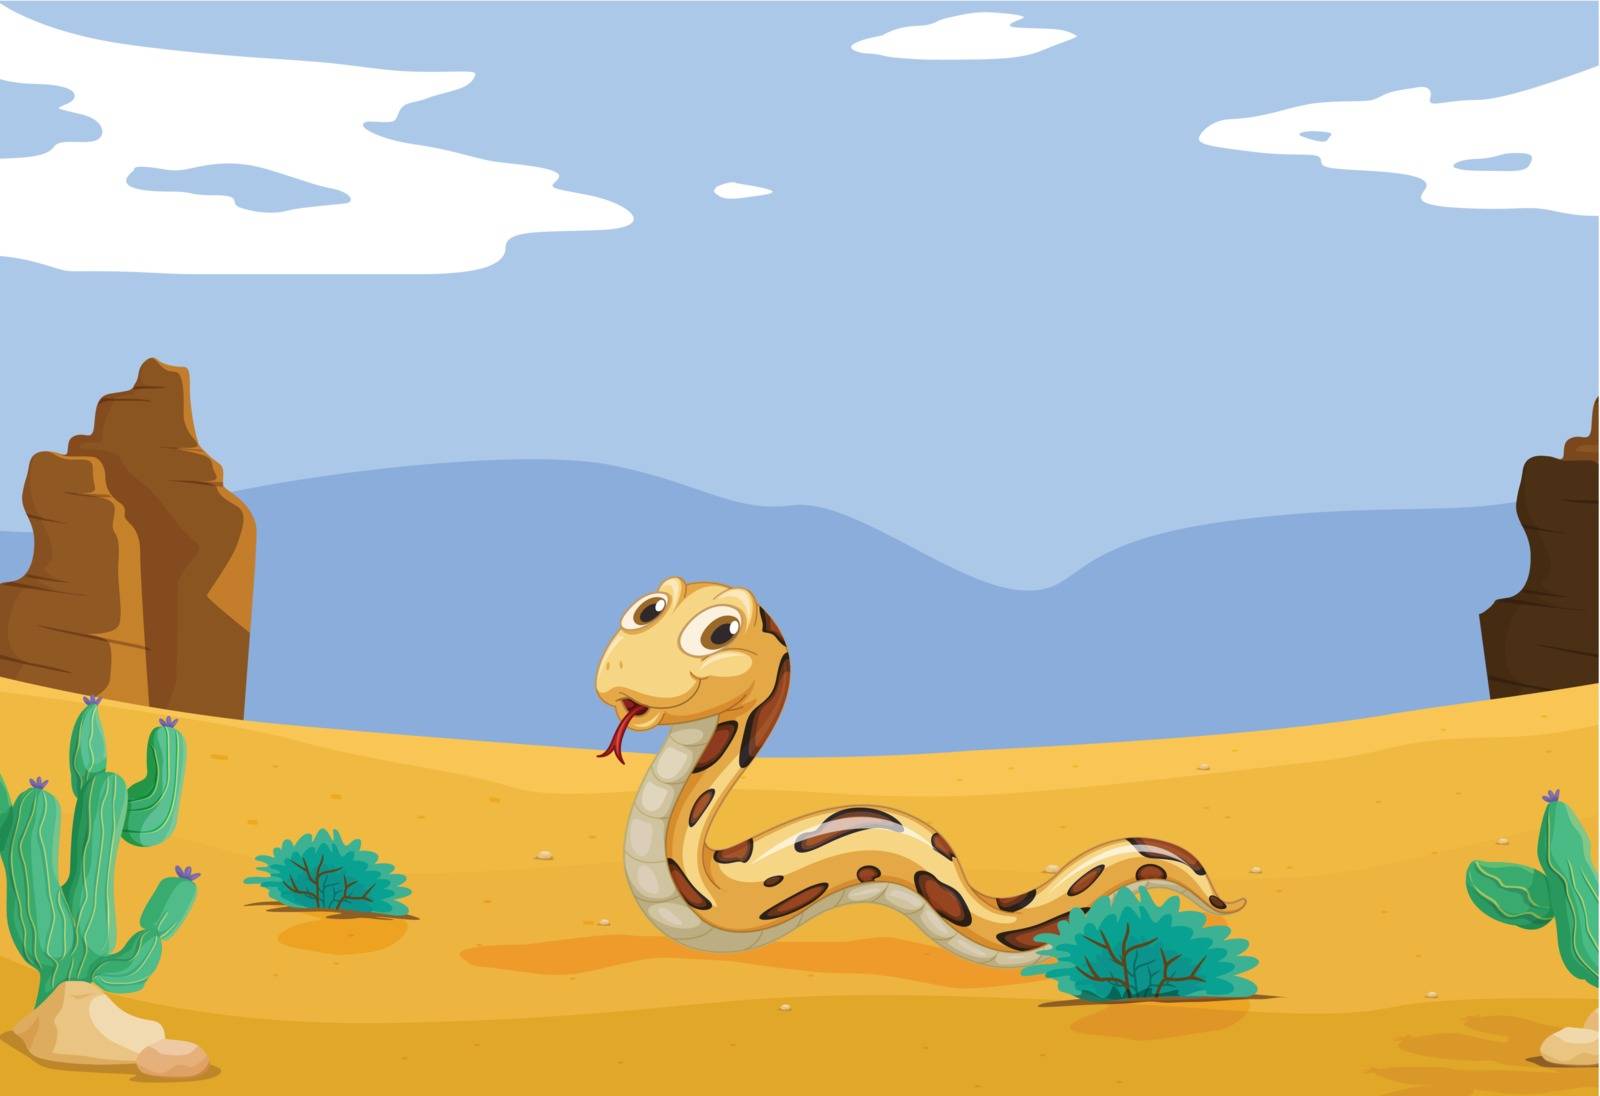 Snake in the desert by iimages